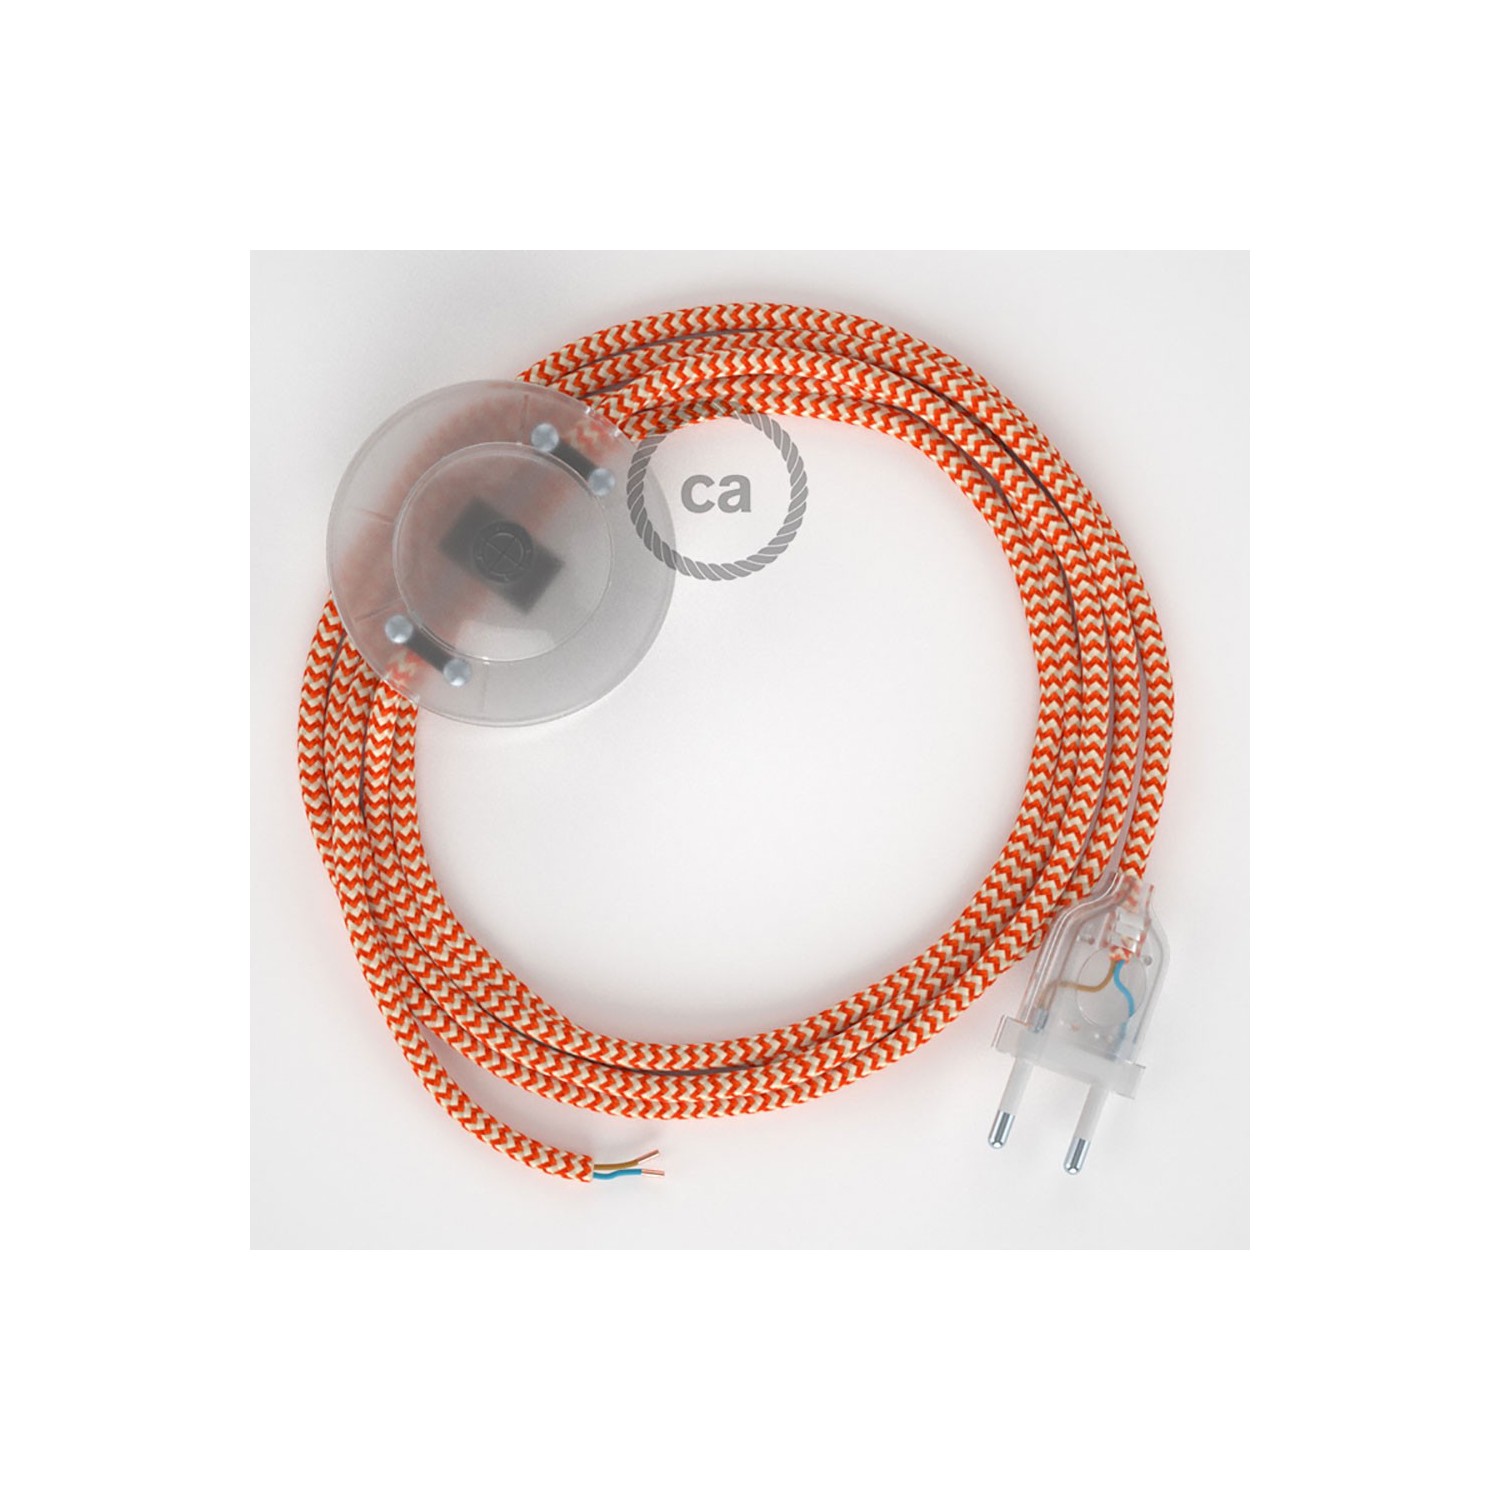 Wiring Pedestal, RZ15 Orange ZigZag Rayon 3 m. Choose the colour of the switch and plug.